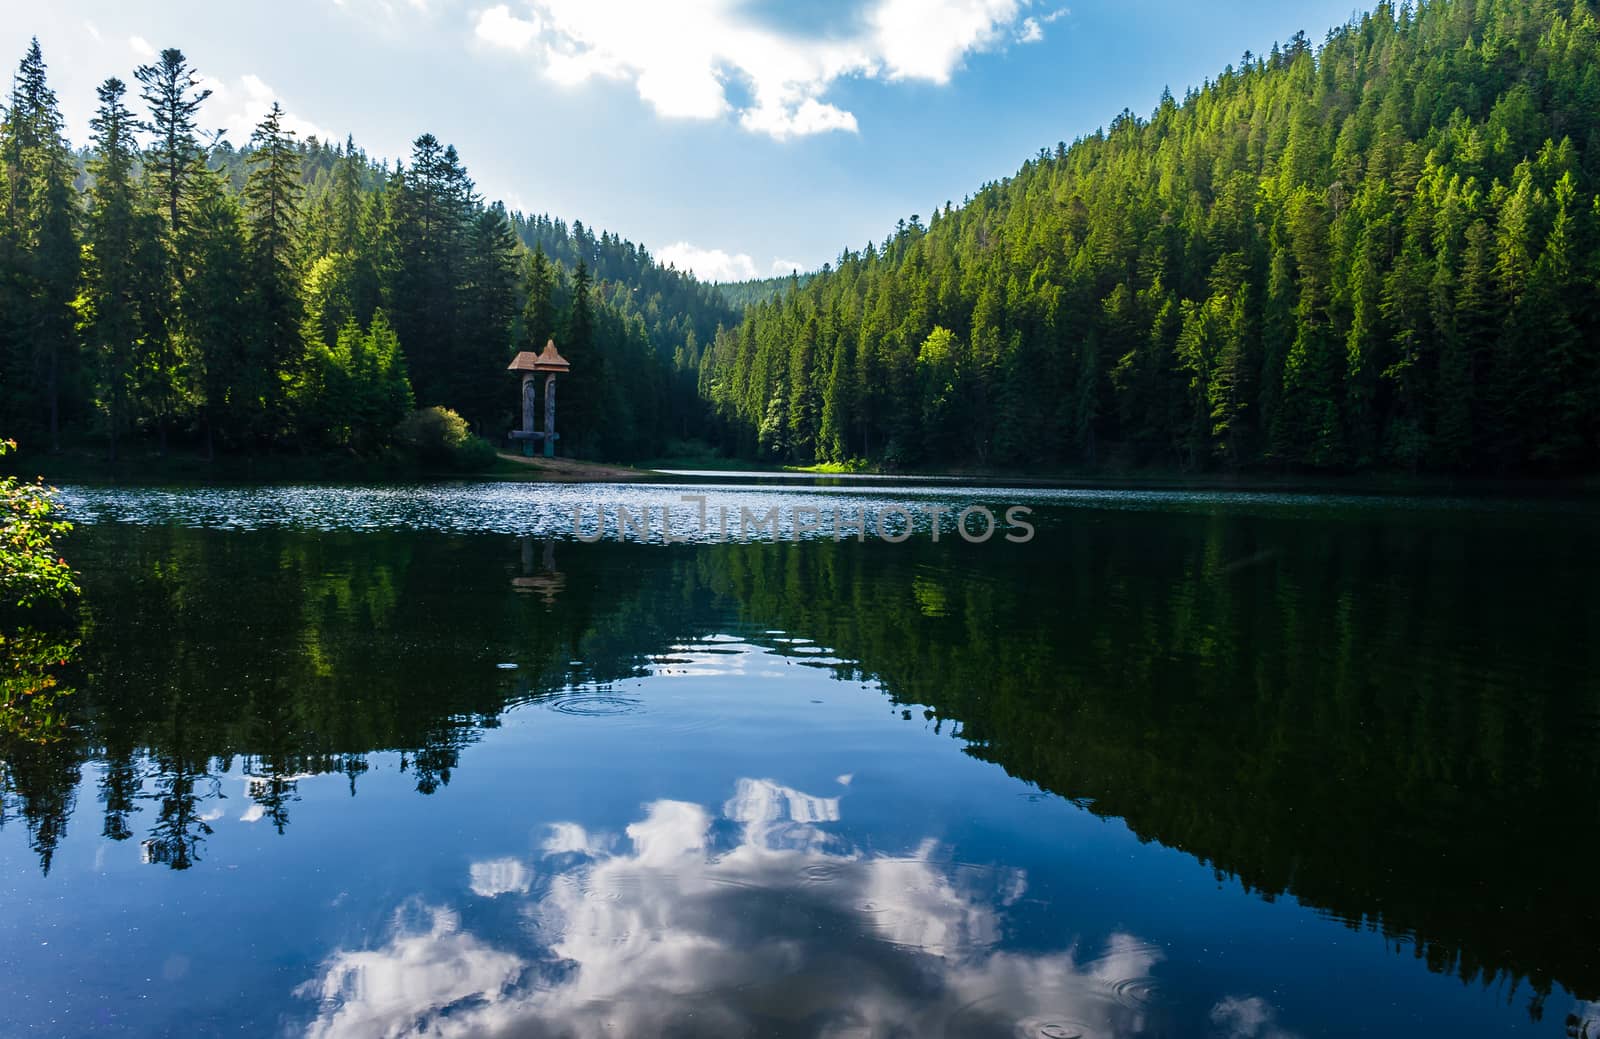 Synevyr lake on summer evening. beautiful scenery among the forest. reflection of a cloud in a rippled water surface